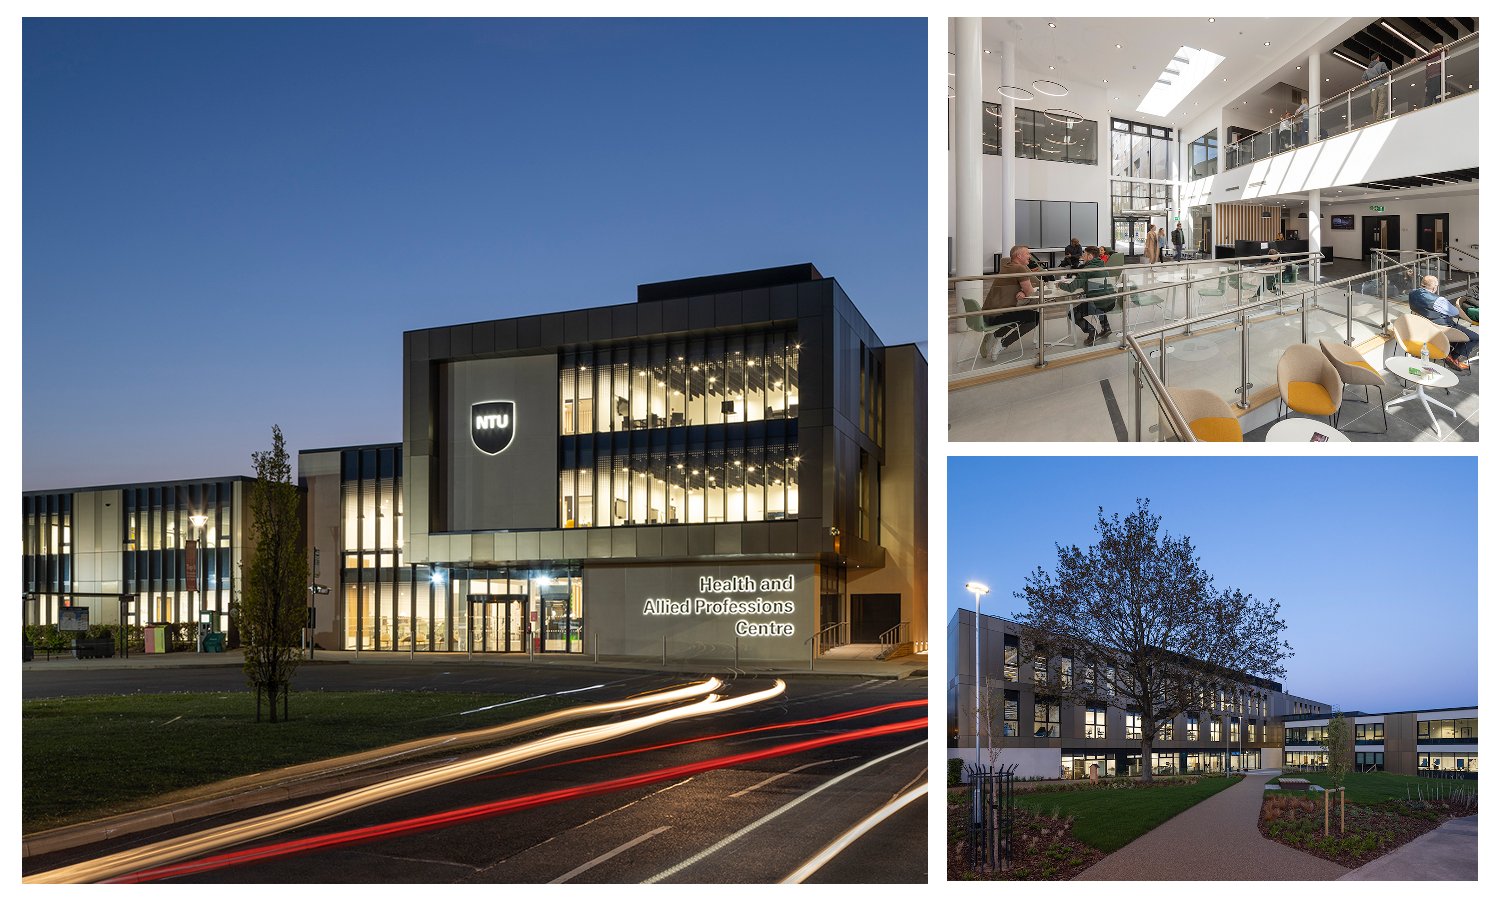 Medical training facility completed at Nottingham Trent University